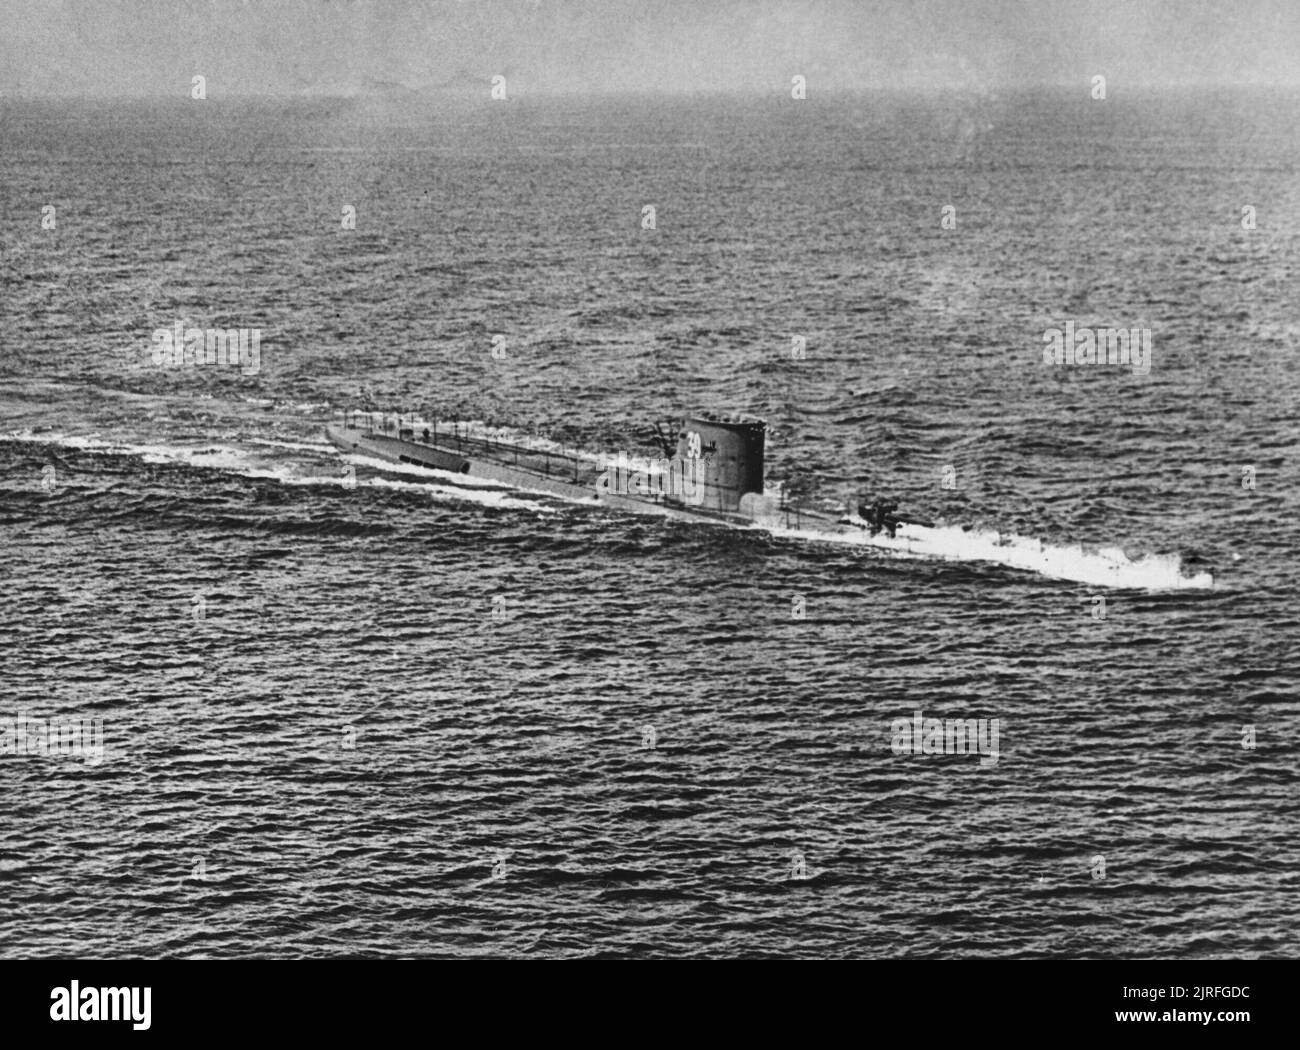 The German Navy in the Second World War The German Type IXA U-boat U-39 about to submerge in the Baltic. U-39 had the dubious distinction of being the first U-boat sunk in the war, when it was depth-charged off the north-west coast of Ireland by Royal Navy destroyers on 14 September 1939, after an unsuccessful attempt to torpedo the aircraft carrier HMS Courageous. Stock Photo